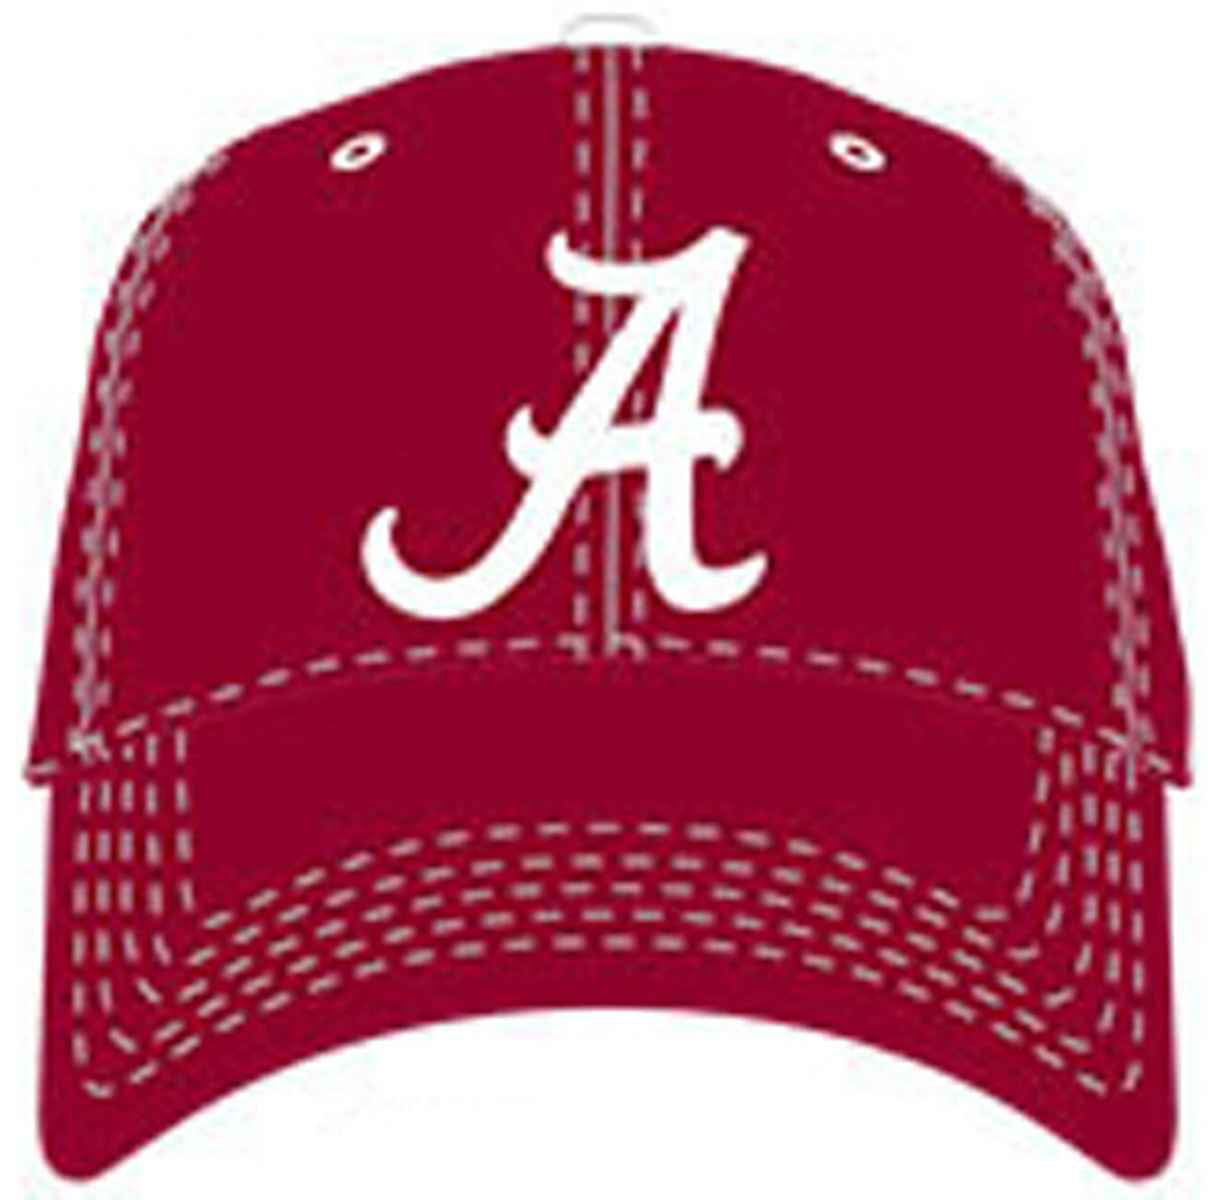 University of Alabama Embroidered A Men's Scrub Cap/Hat One size fits most 